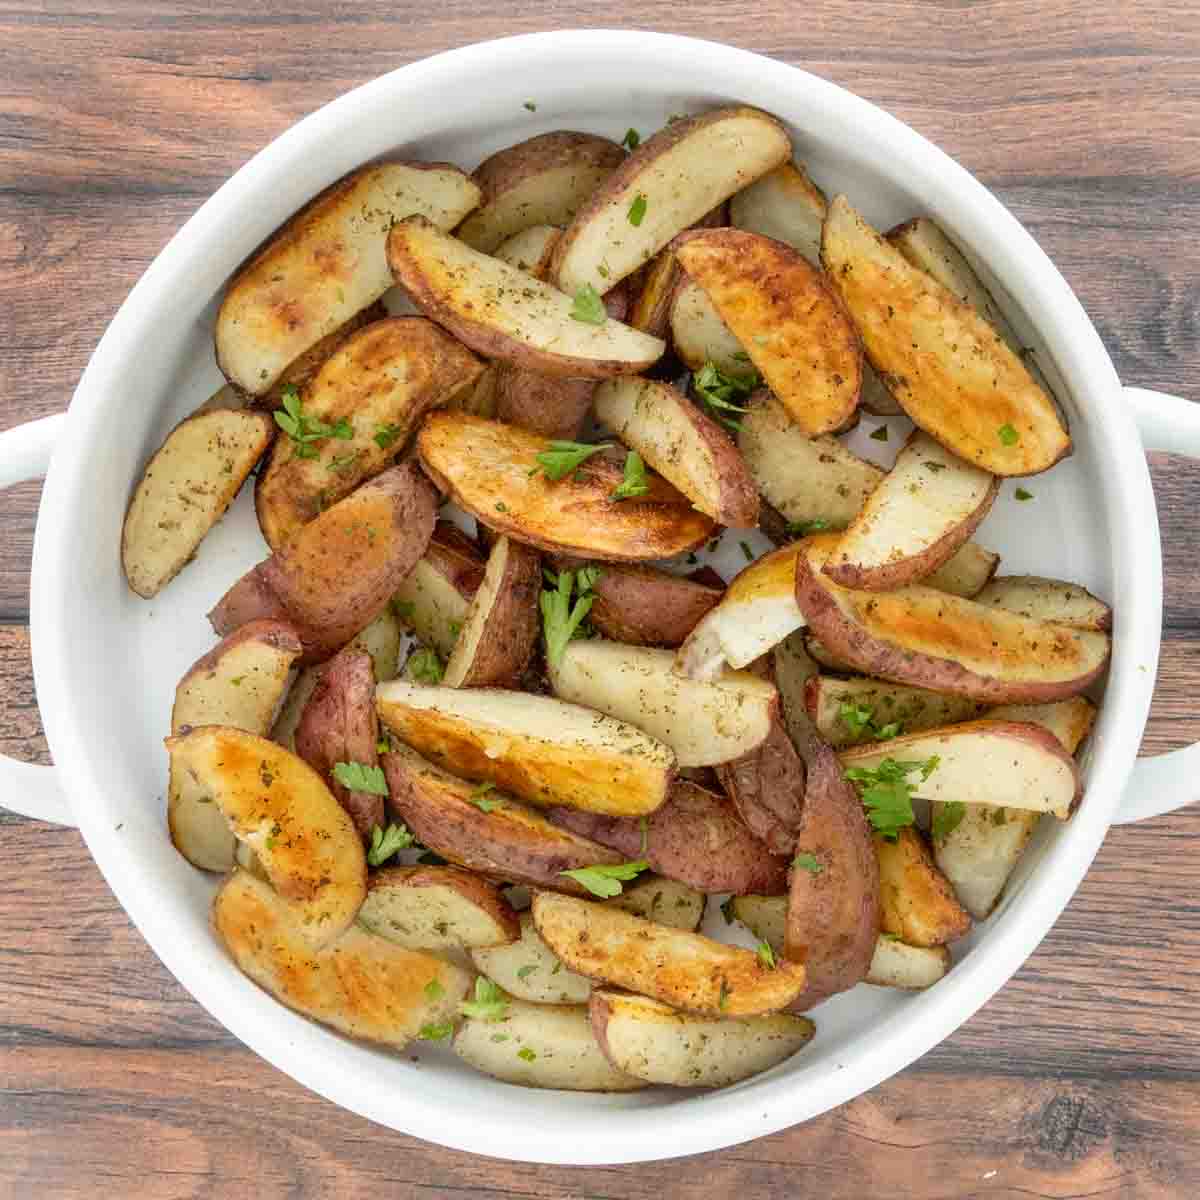 Oven roasted potato wedges in a white serving bowl.